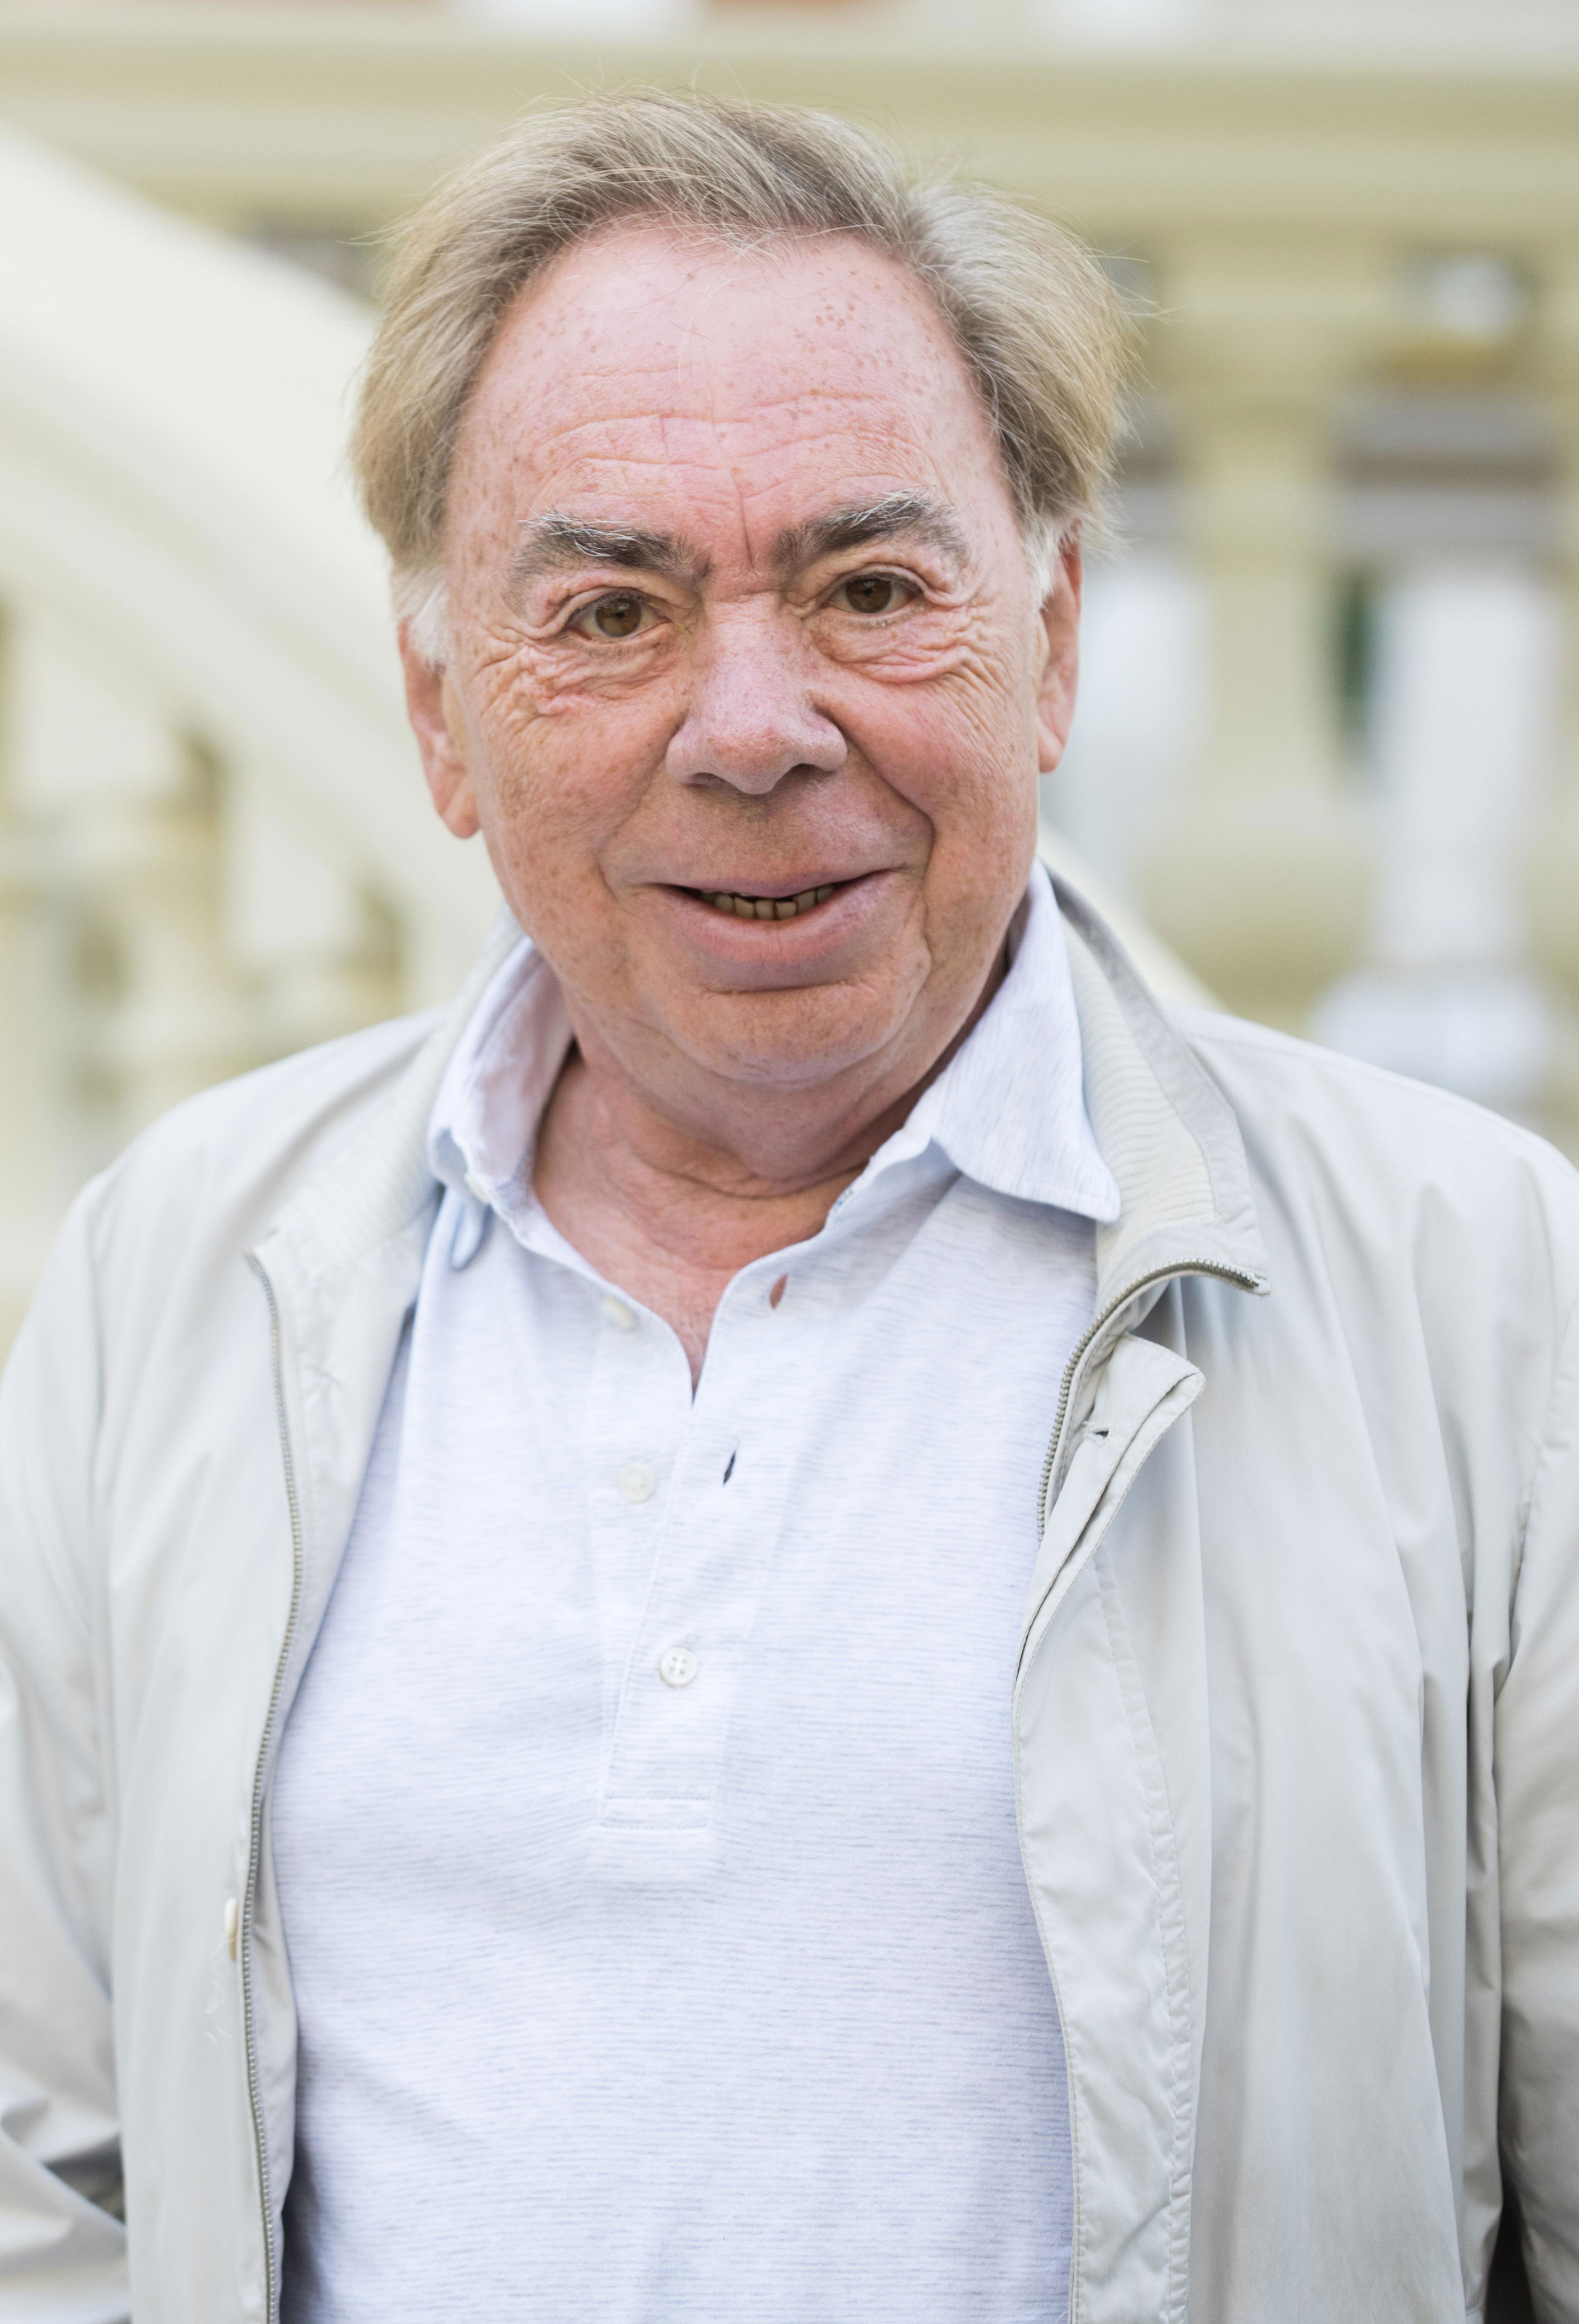 <p><span>On March 25, 2023, composer and musical theater impresario Andrew Lloyd Webber lost his son -- Nick Lloyd Webber, who was a Grammy-nominated composer himself -- to gastric cancer. He was 43. </span></p><p>"I am shattered to have to announce that my beloved elder son Nick died a few hours ago in Basingstoke Hospital [in England]. His whole family is gathered together and we are all totally bereft. Thank you for all your thoughts during this difficult time," the "Cats" and "The Phantom of the Opera" musician wrote in a statement released to multiple media outlets.</p><p>Andrew revealed on Instagram two days earlier that Nick -- his son with first wife Sarah Hugill -- had been transferred to hospice care after catching pneumonia amid his 18-month battle with stomach cancer. (The six-time Tony Award winner has an older daughter with Sarah and three children -- two sons and a daughter -- with third wife Madeleine Gurdon.)</p>